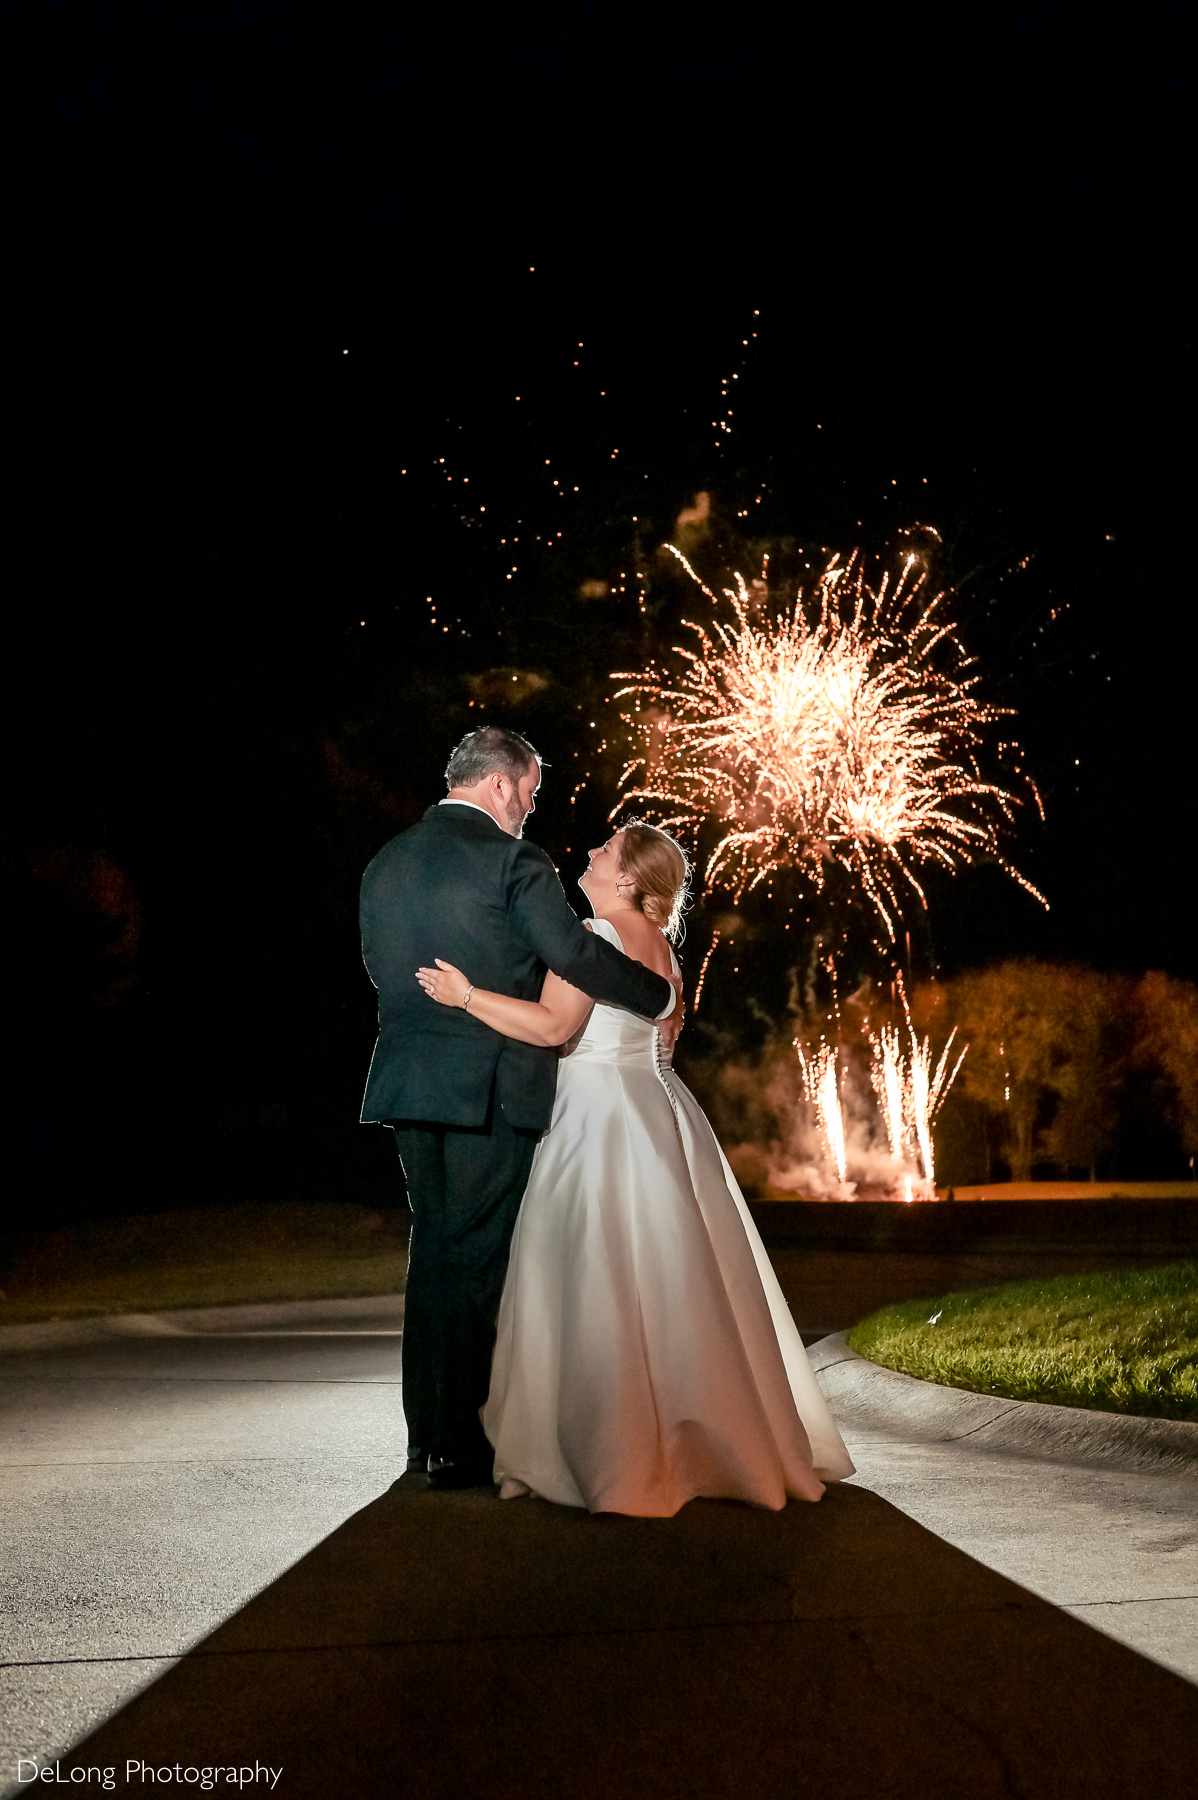 Bride and groom enjoy fireworks show at the Club at Longview by Charlotte Wedding Photographers DeLong Photography